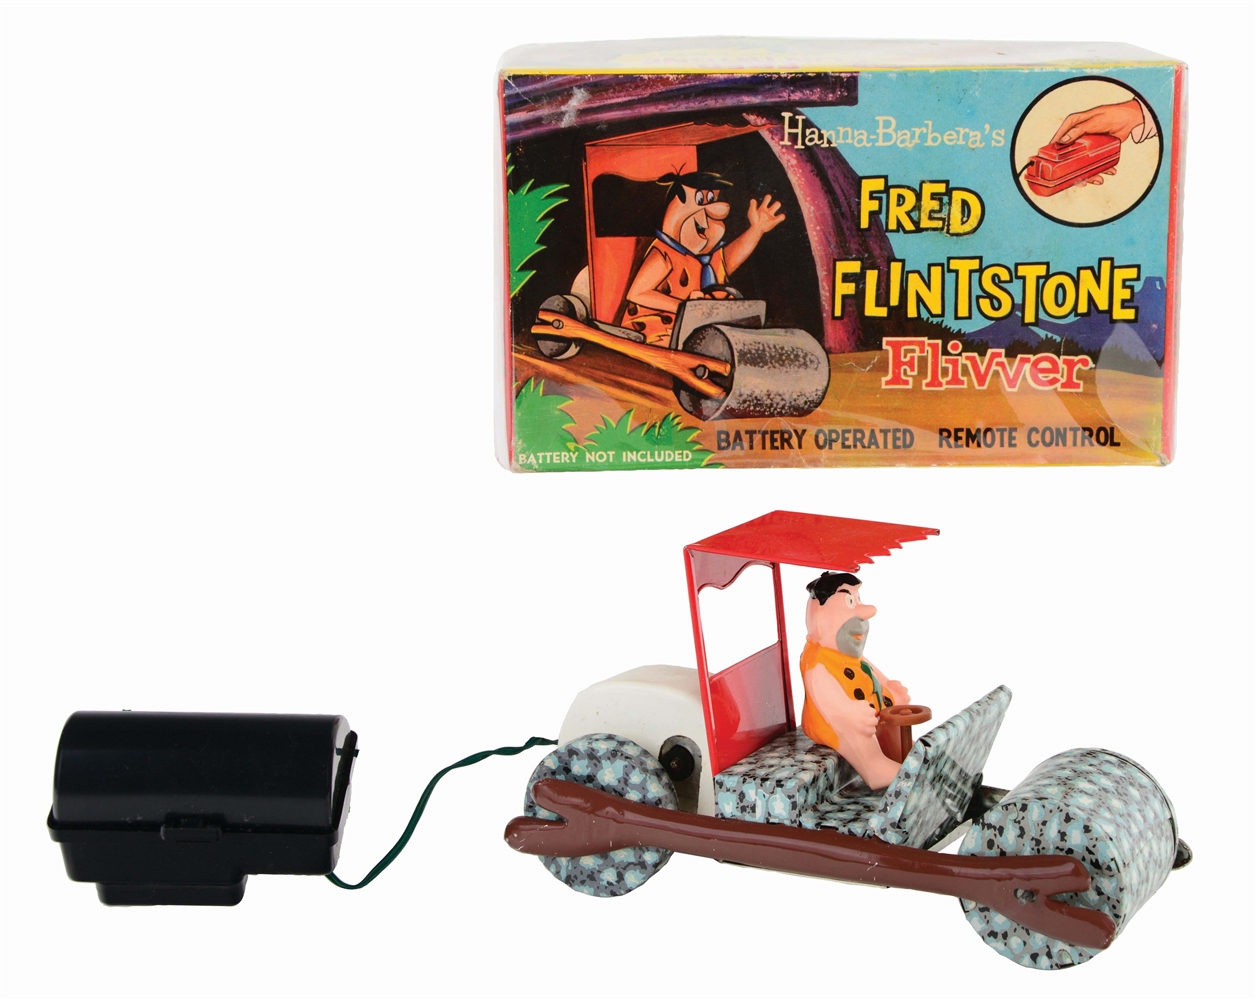 MARX TIN-LITHO AND PLASTIC FRED FLINTSTONE BATTERY-OPERATED FLIVVER TOY.